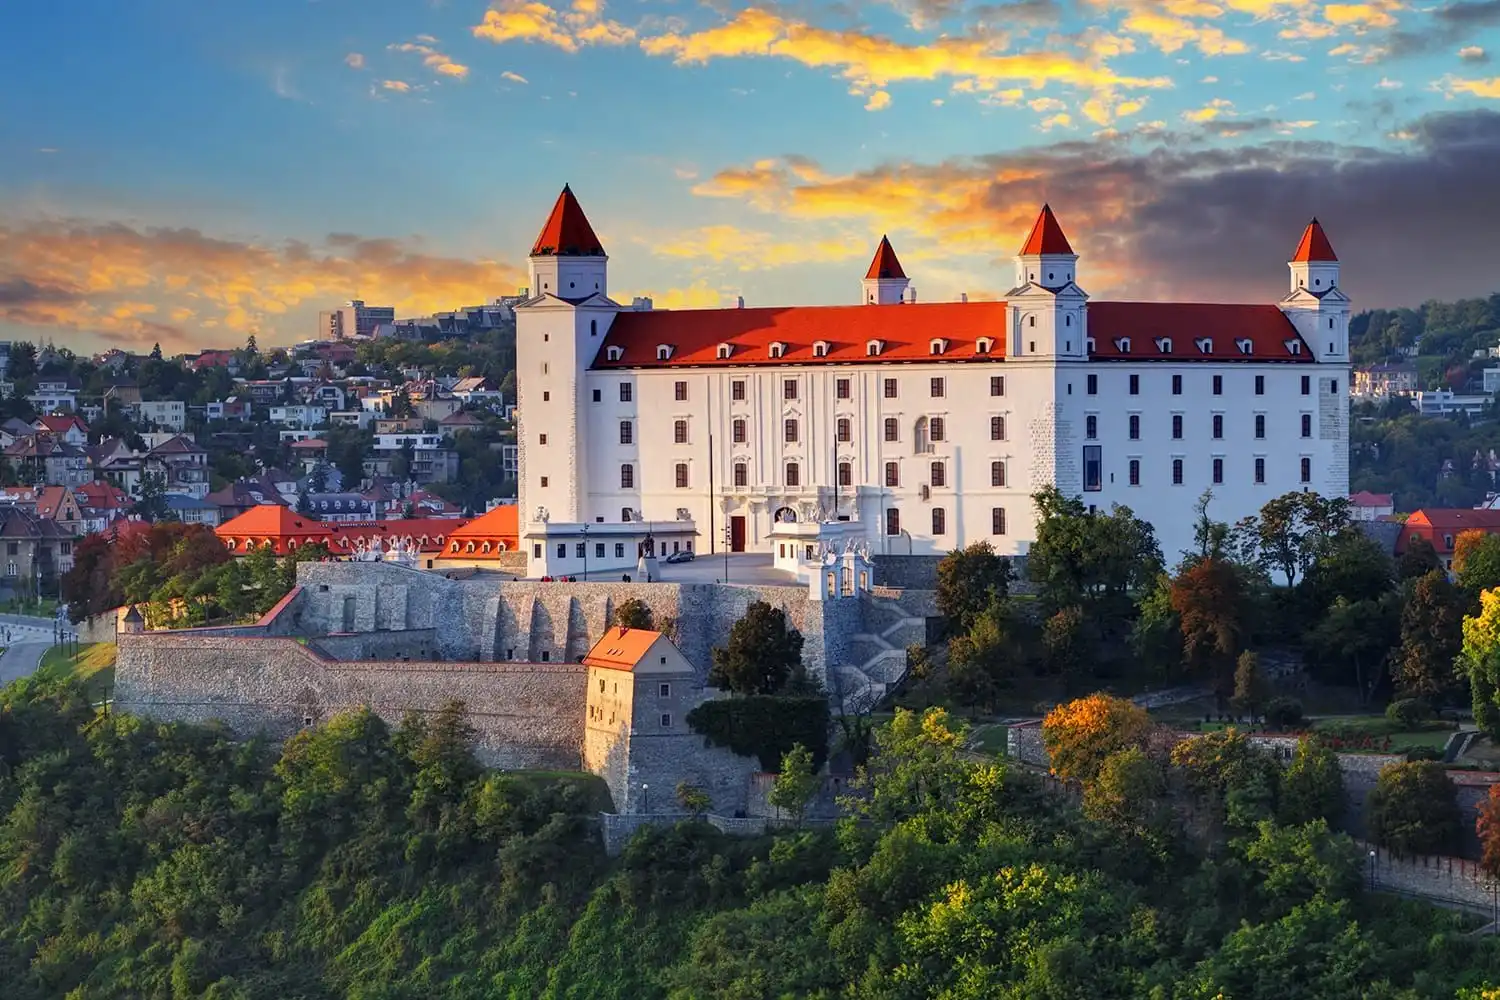 Bratislava Castle Slovakia Is One Of The Best Places To Travel In December On A Budget In Europe